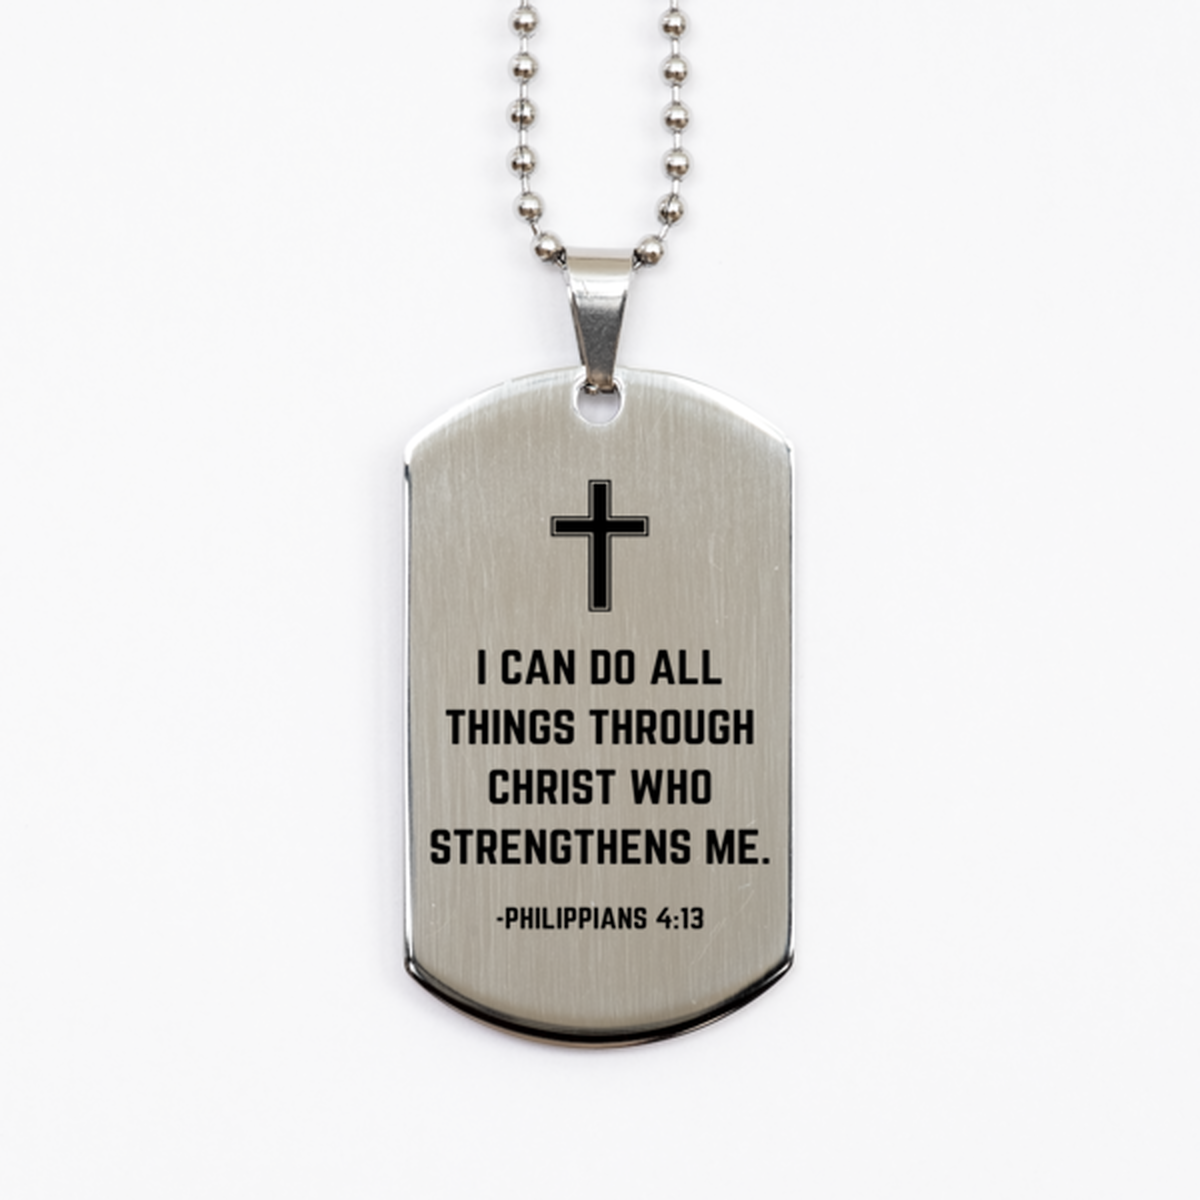 Baptism Gifts For Teenage Boys Girls, Christian Bible Verse Silver Dog Tag, I can do all things through Christ, Confirmation Gifts, Bible Verse Necklace for Son, Godson, Grandson, Nephew